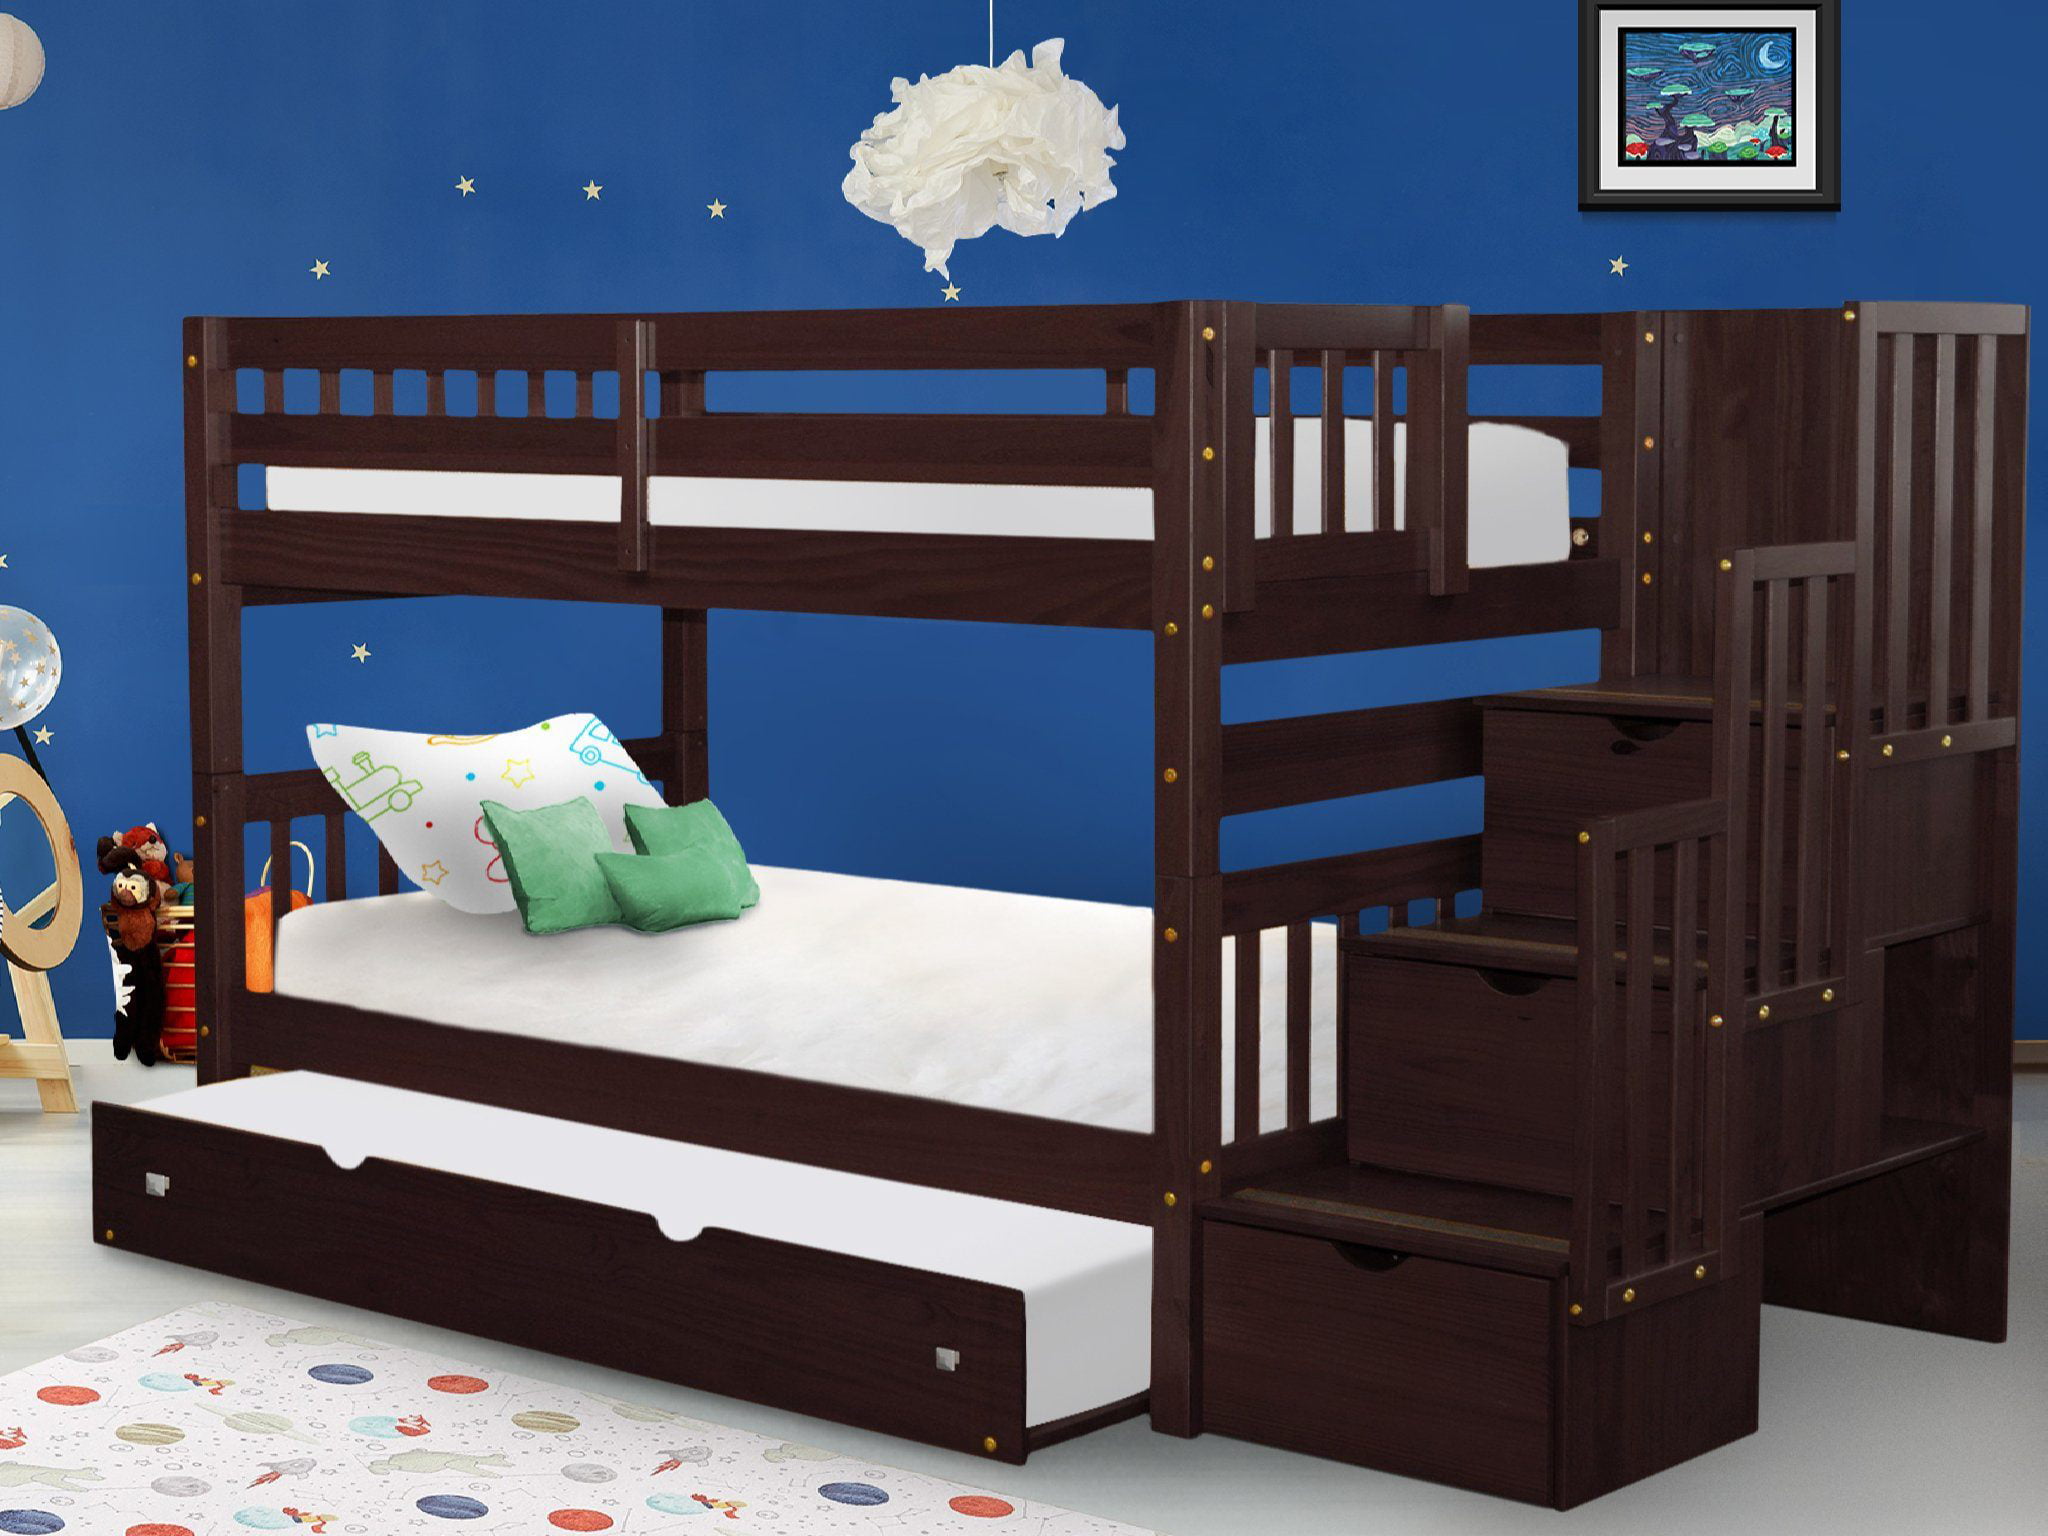 Bedz King Stairway Bunk Beds Twin Over, Bunk Beds That Convert To Twin Beds